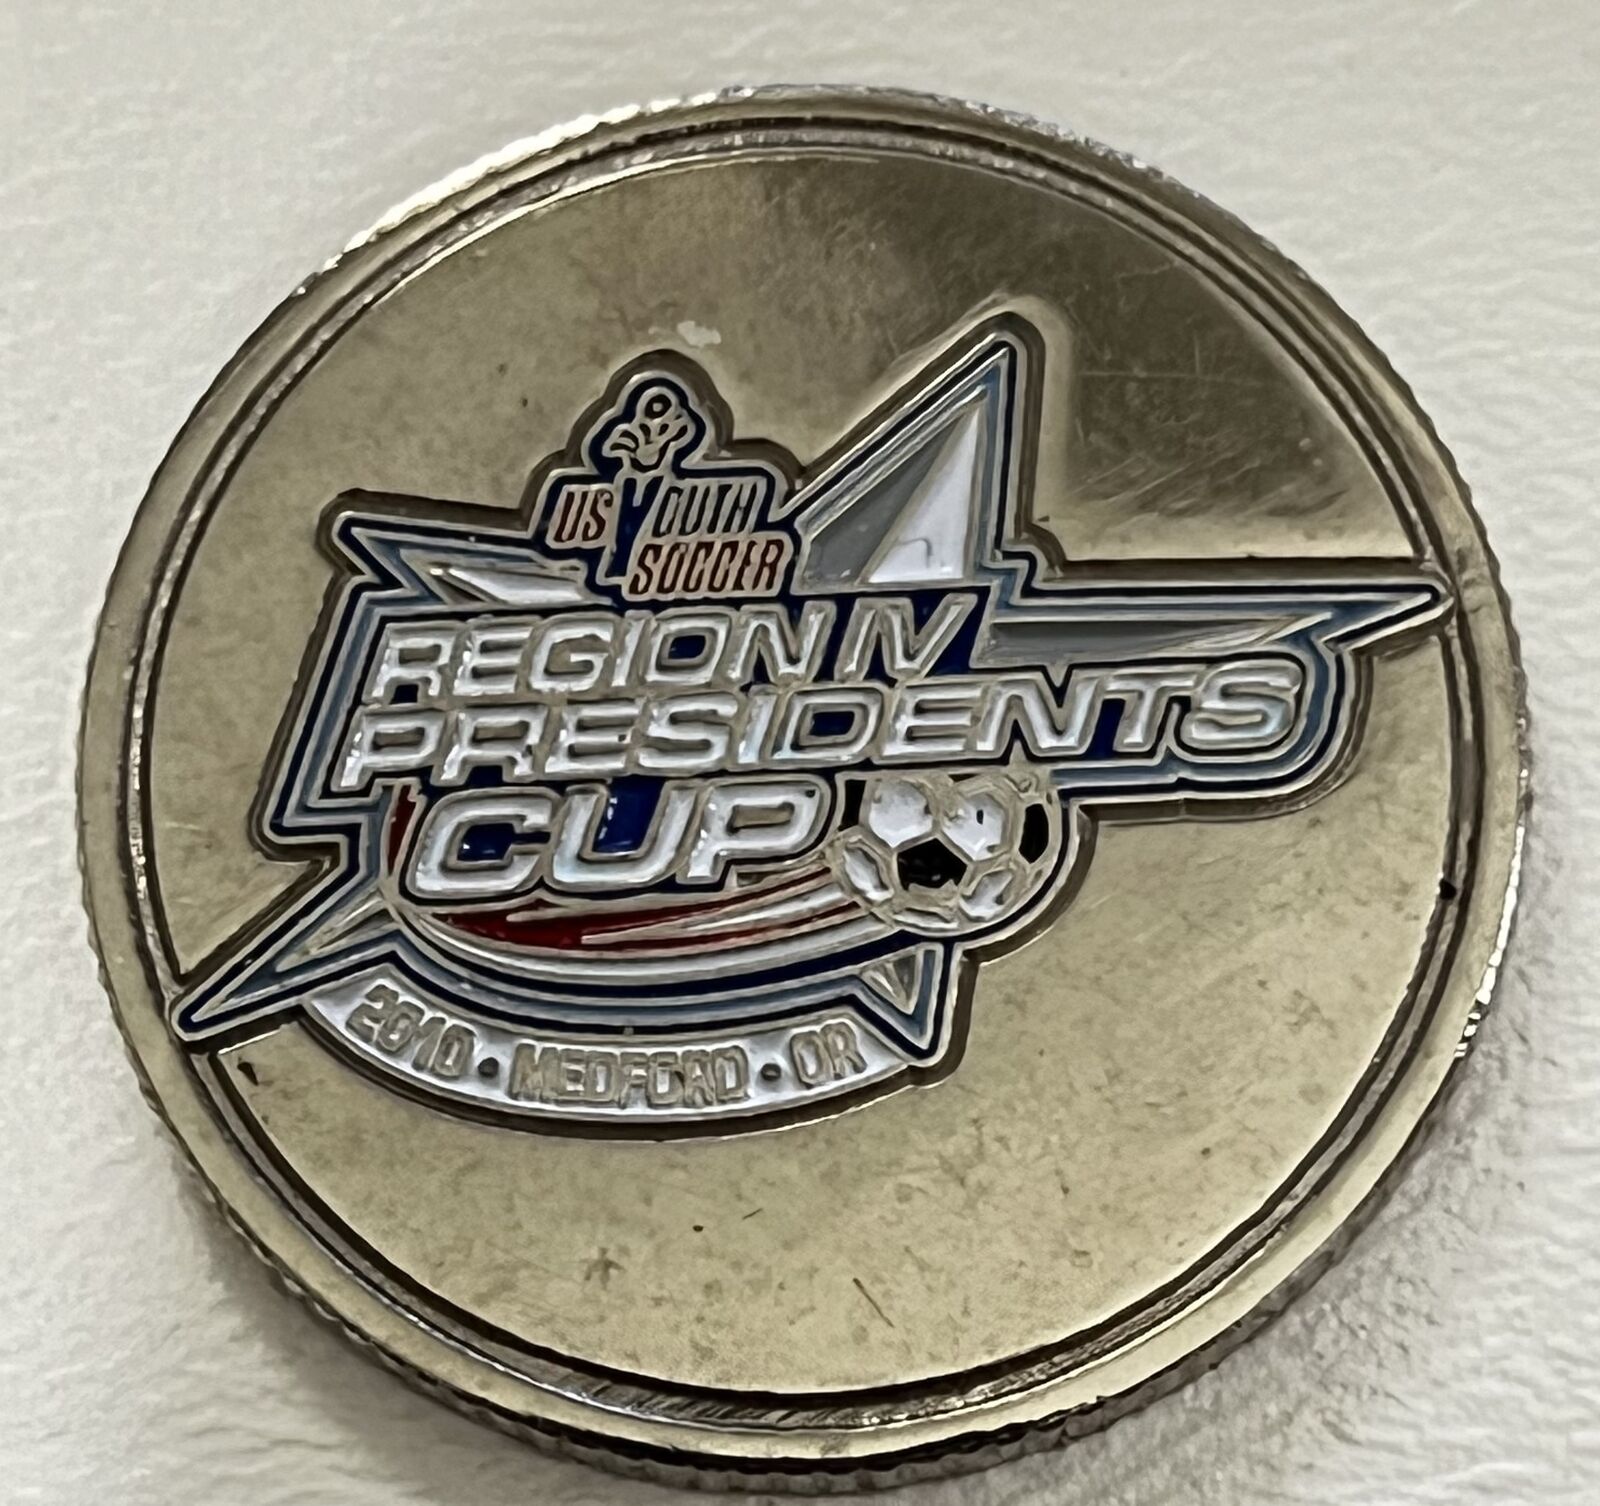 US Youth Soccer Region IV Presidents Cup Medallion